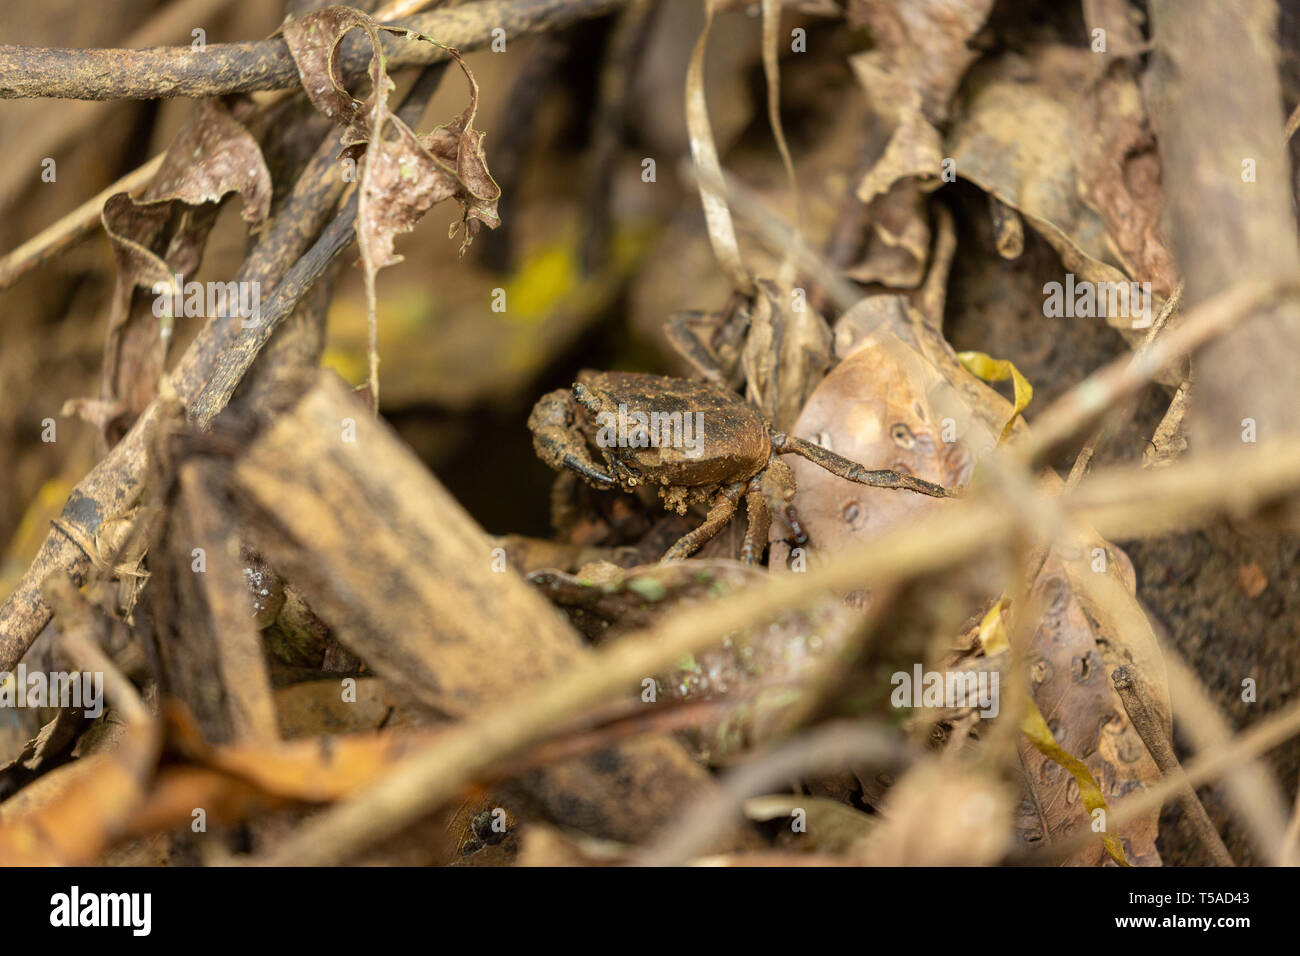 Freshwater forest crab camouflaged on the forest floor in the leaf litter Stock Photo